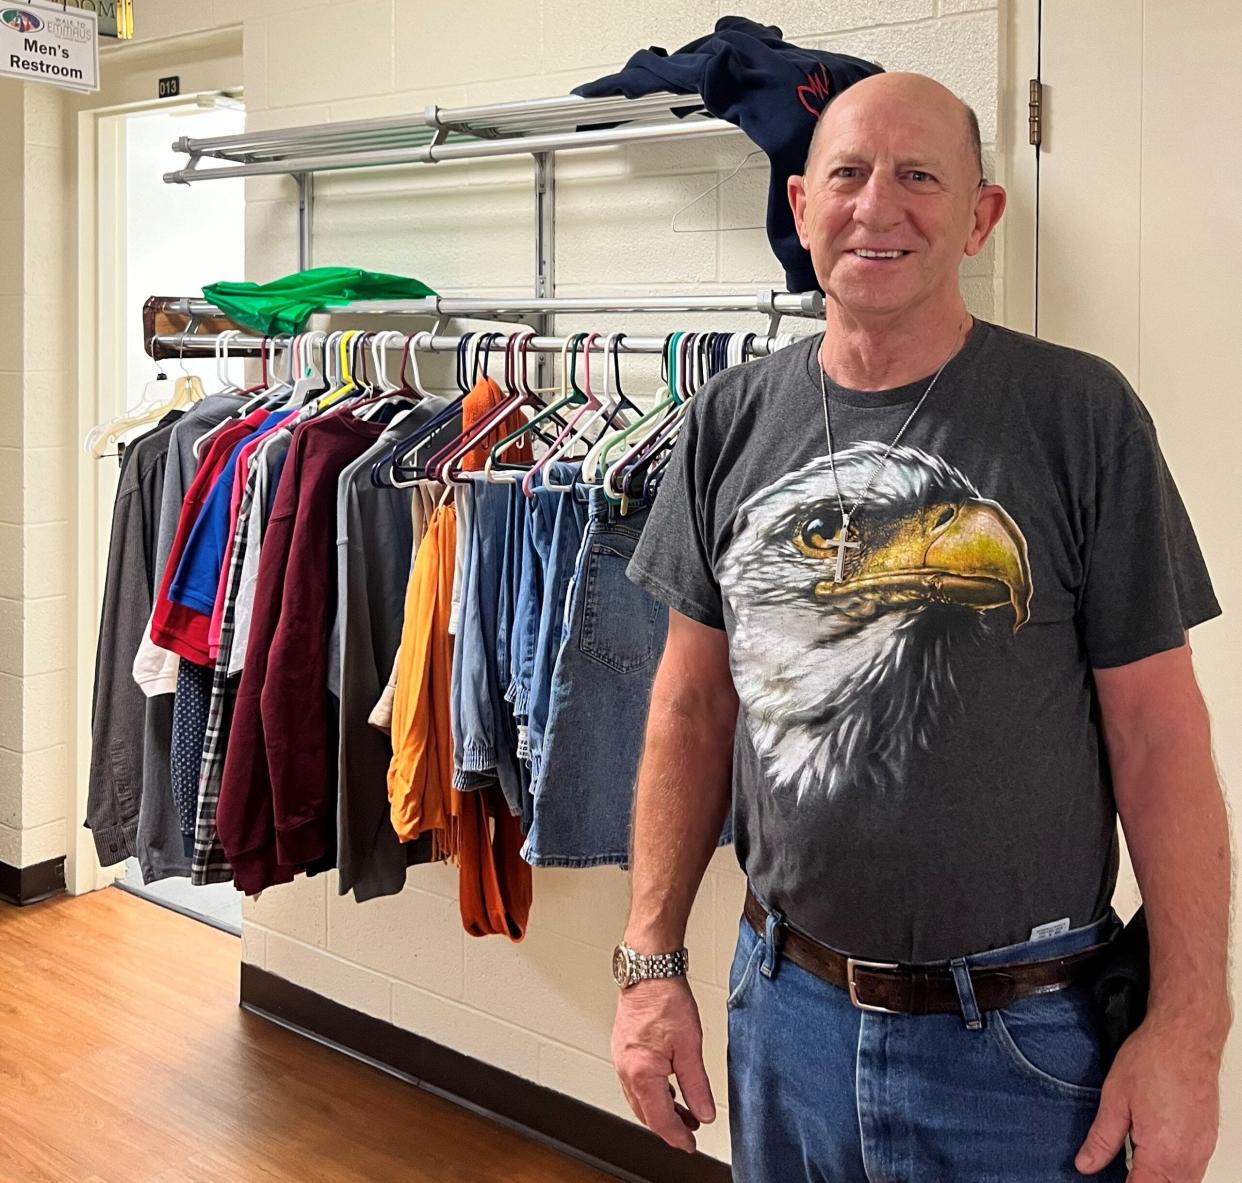 Cliff Wartenbee, a member of First United Methodist Church in downtown Newark, said he felt led to help others by organizing the church's shower ministry for unhoused people in need.